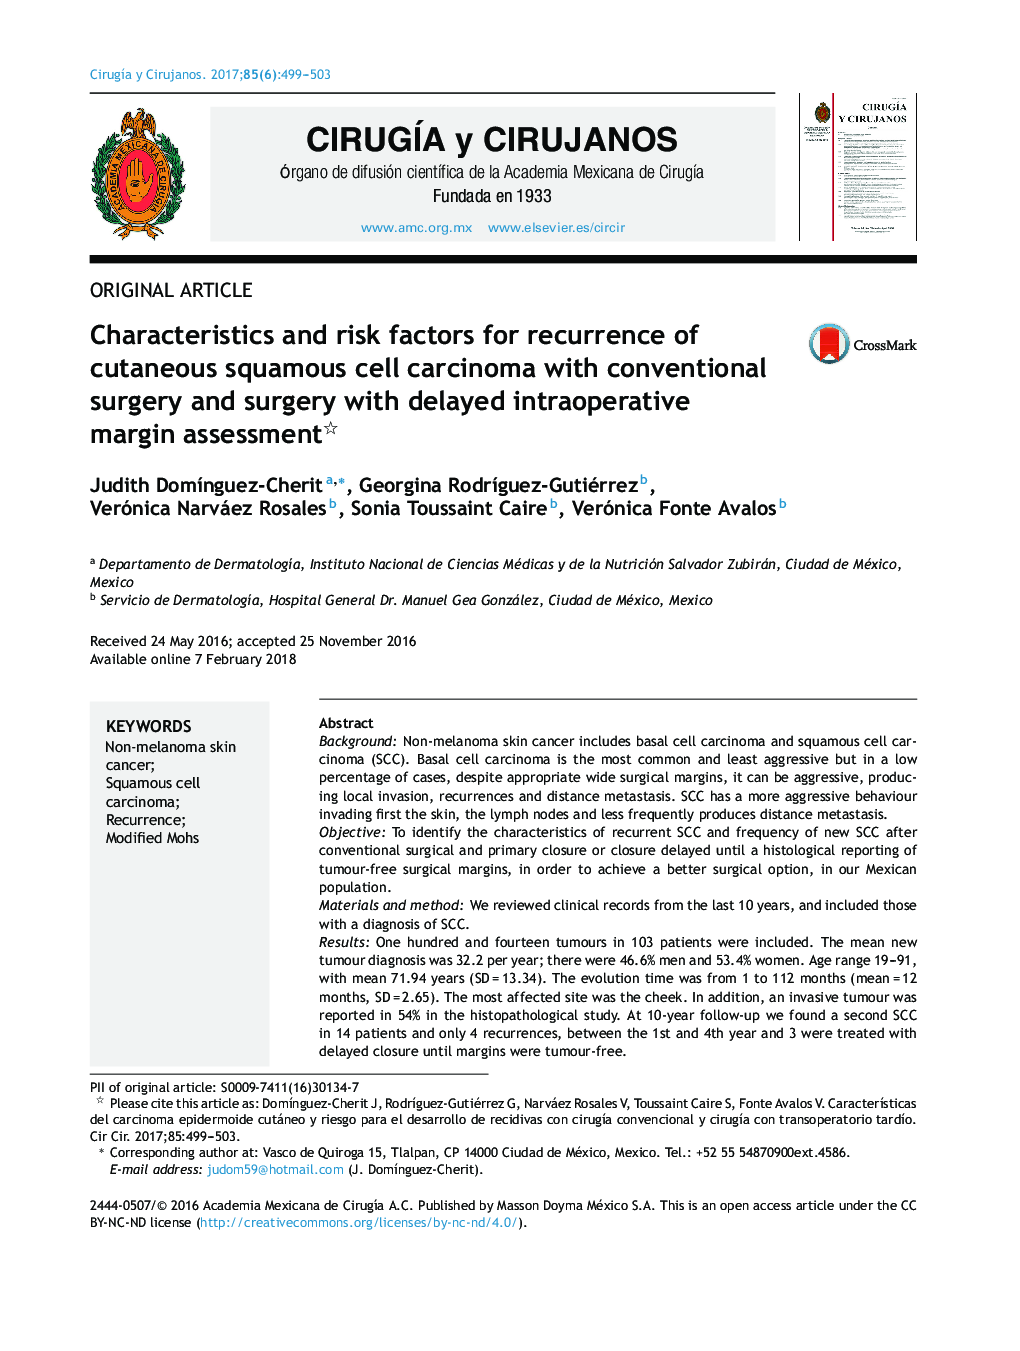 Characteristics and risk factors for recurrence of cutaneous squamous cell carcinoma with conventional surgery and surgery with delayed intraoperative margin assessment